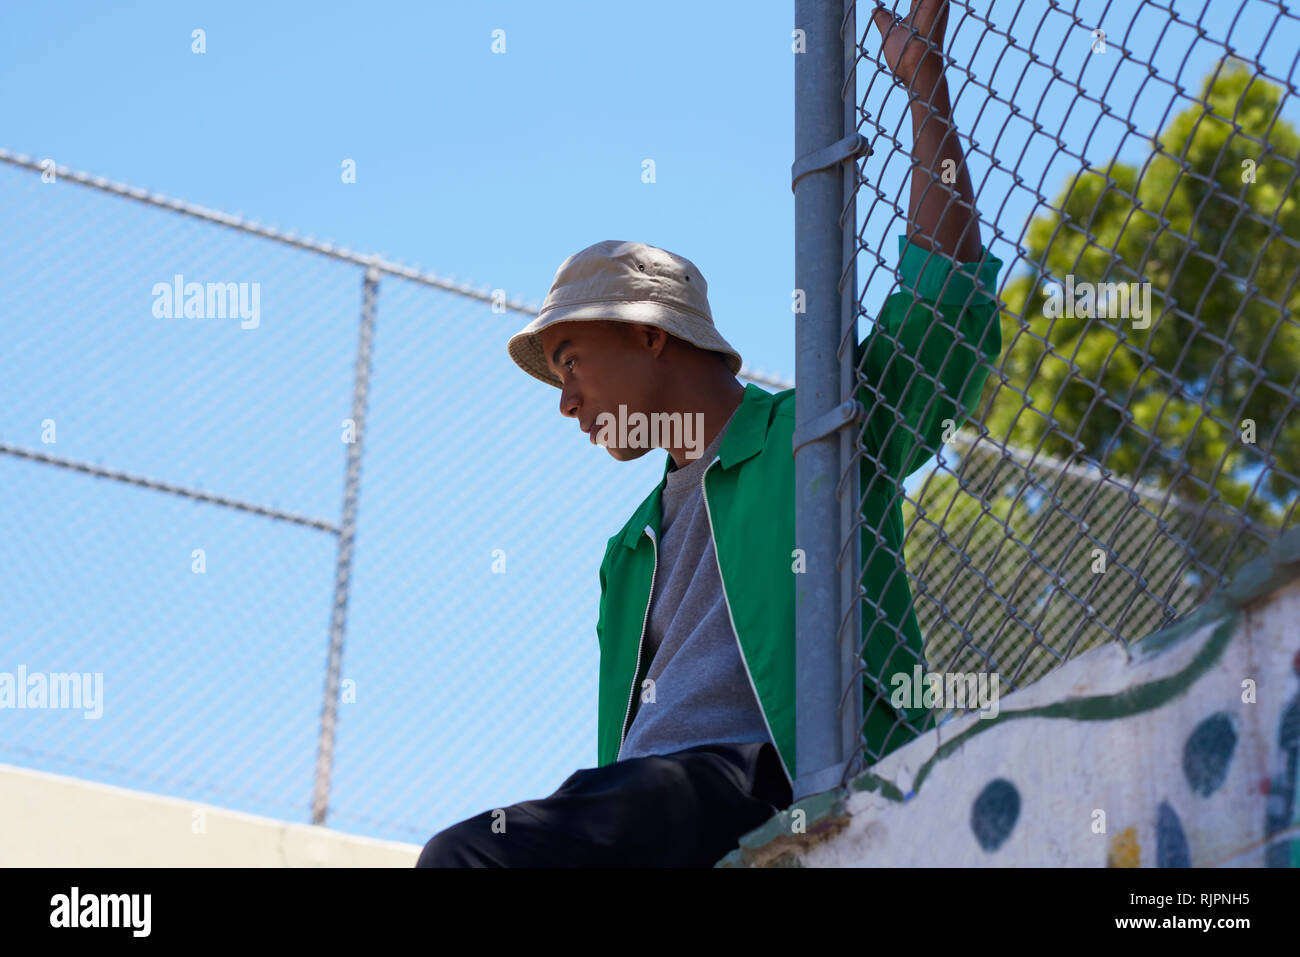 Young man looking out from park fence, low angle view, Los Angeles, California, USA Stock Photo